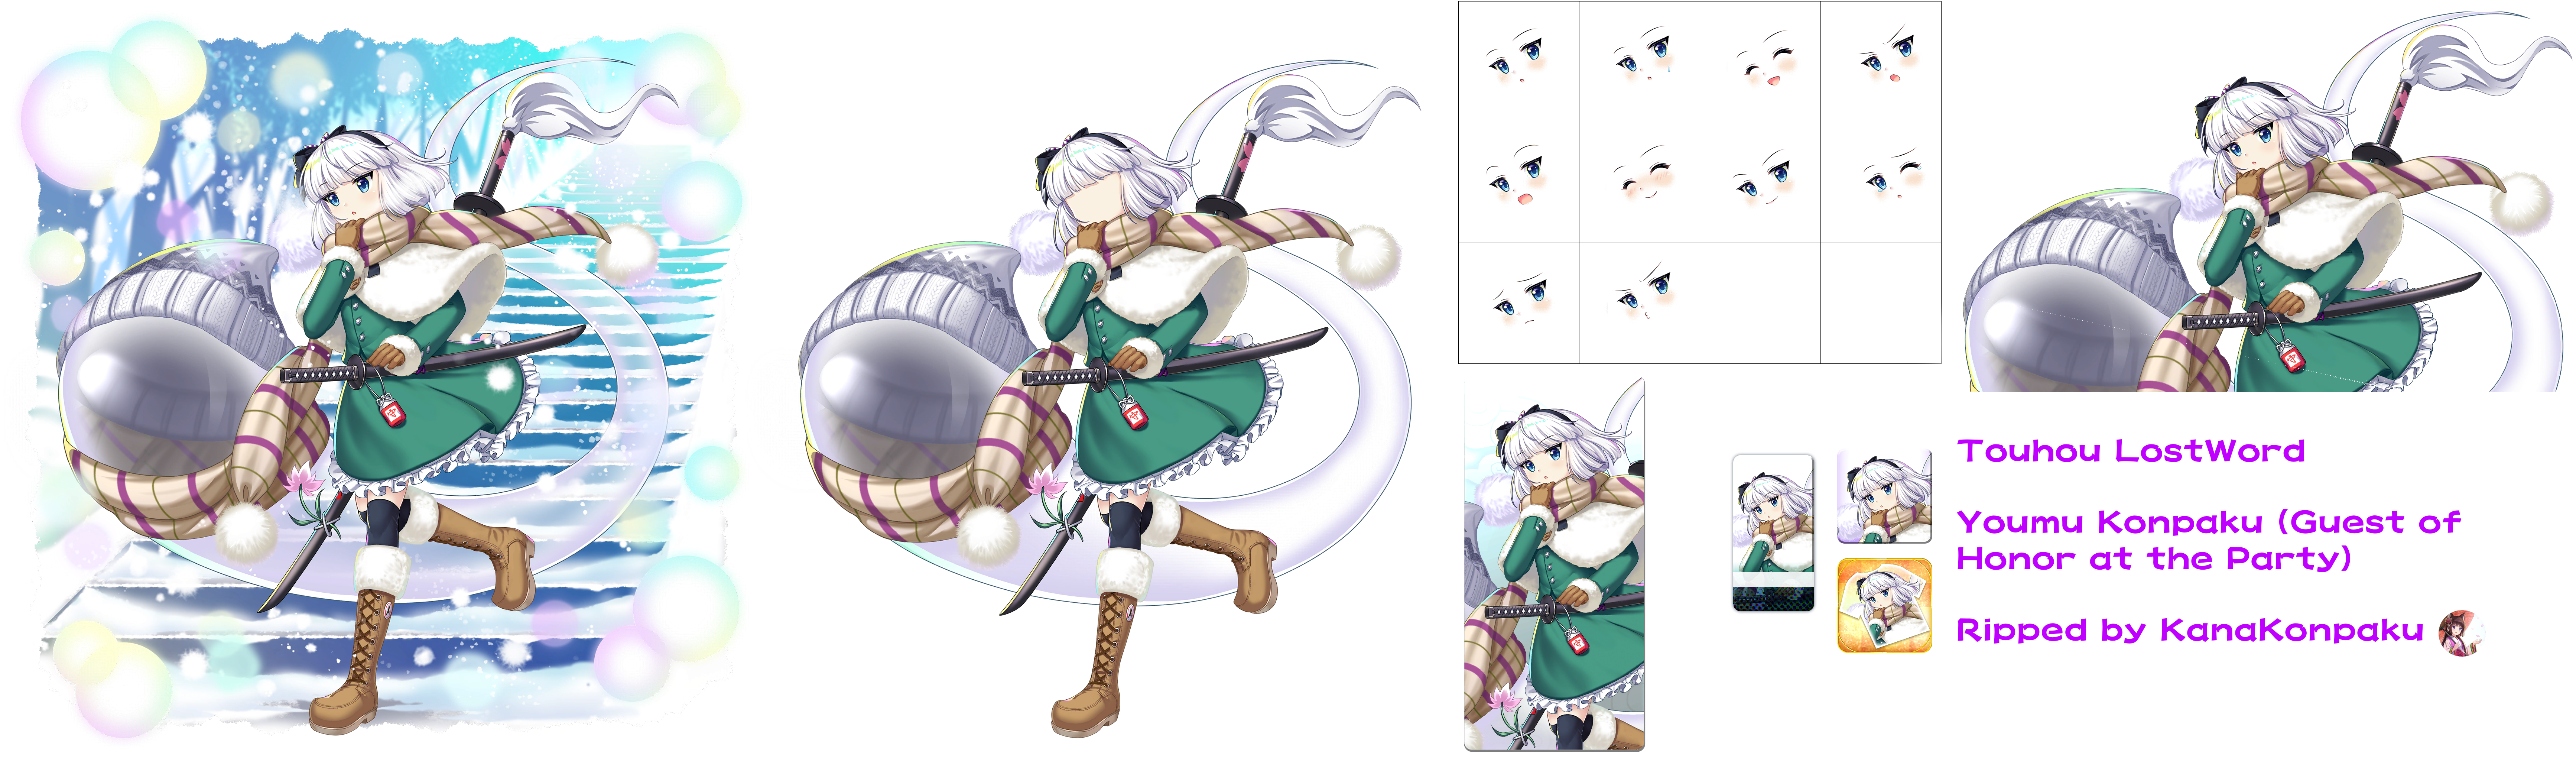 Youmu Konpaku (Guest of Honor at the Party)